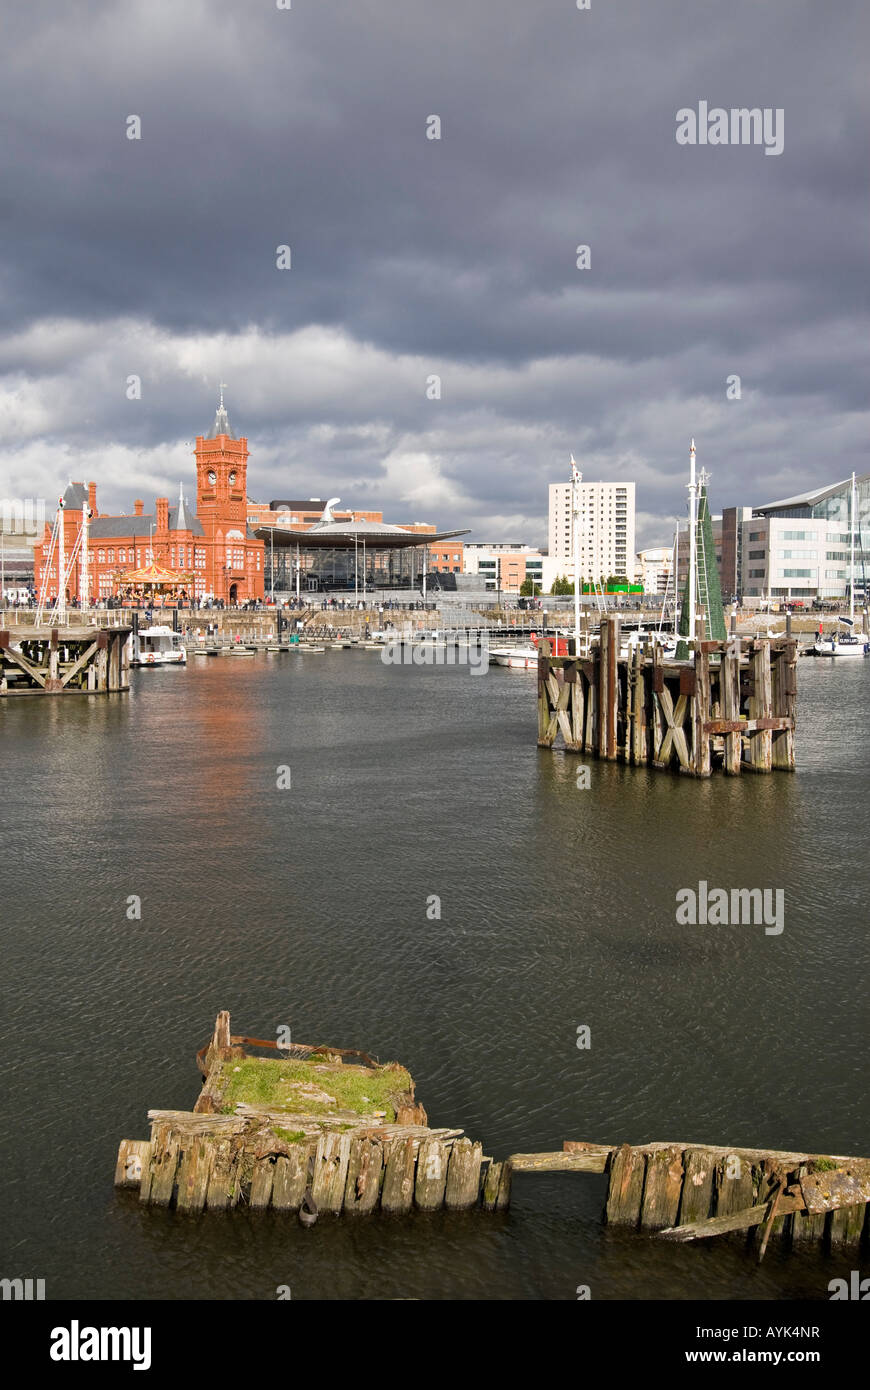 Vertical view of Mermaid Quay and Pierhead Building at the Cardiff Bay Development with thundery clouds in the background Stock Photo